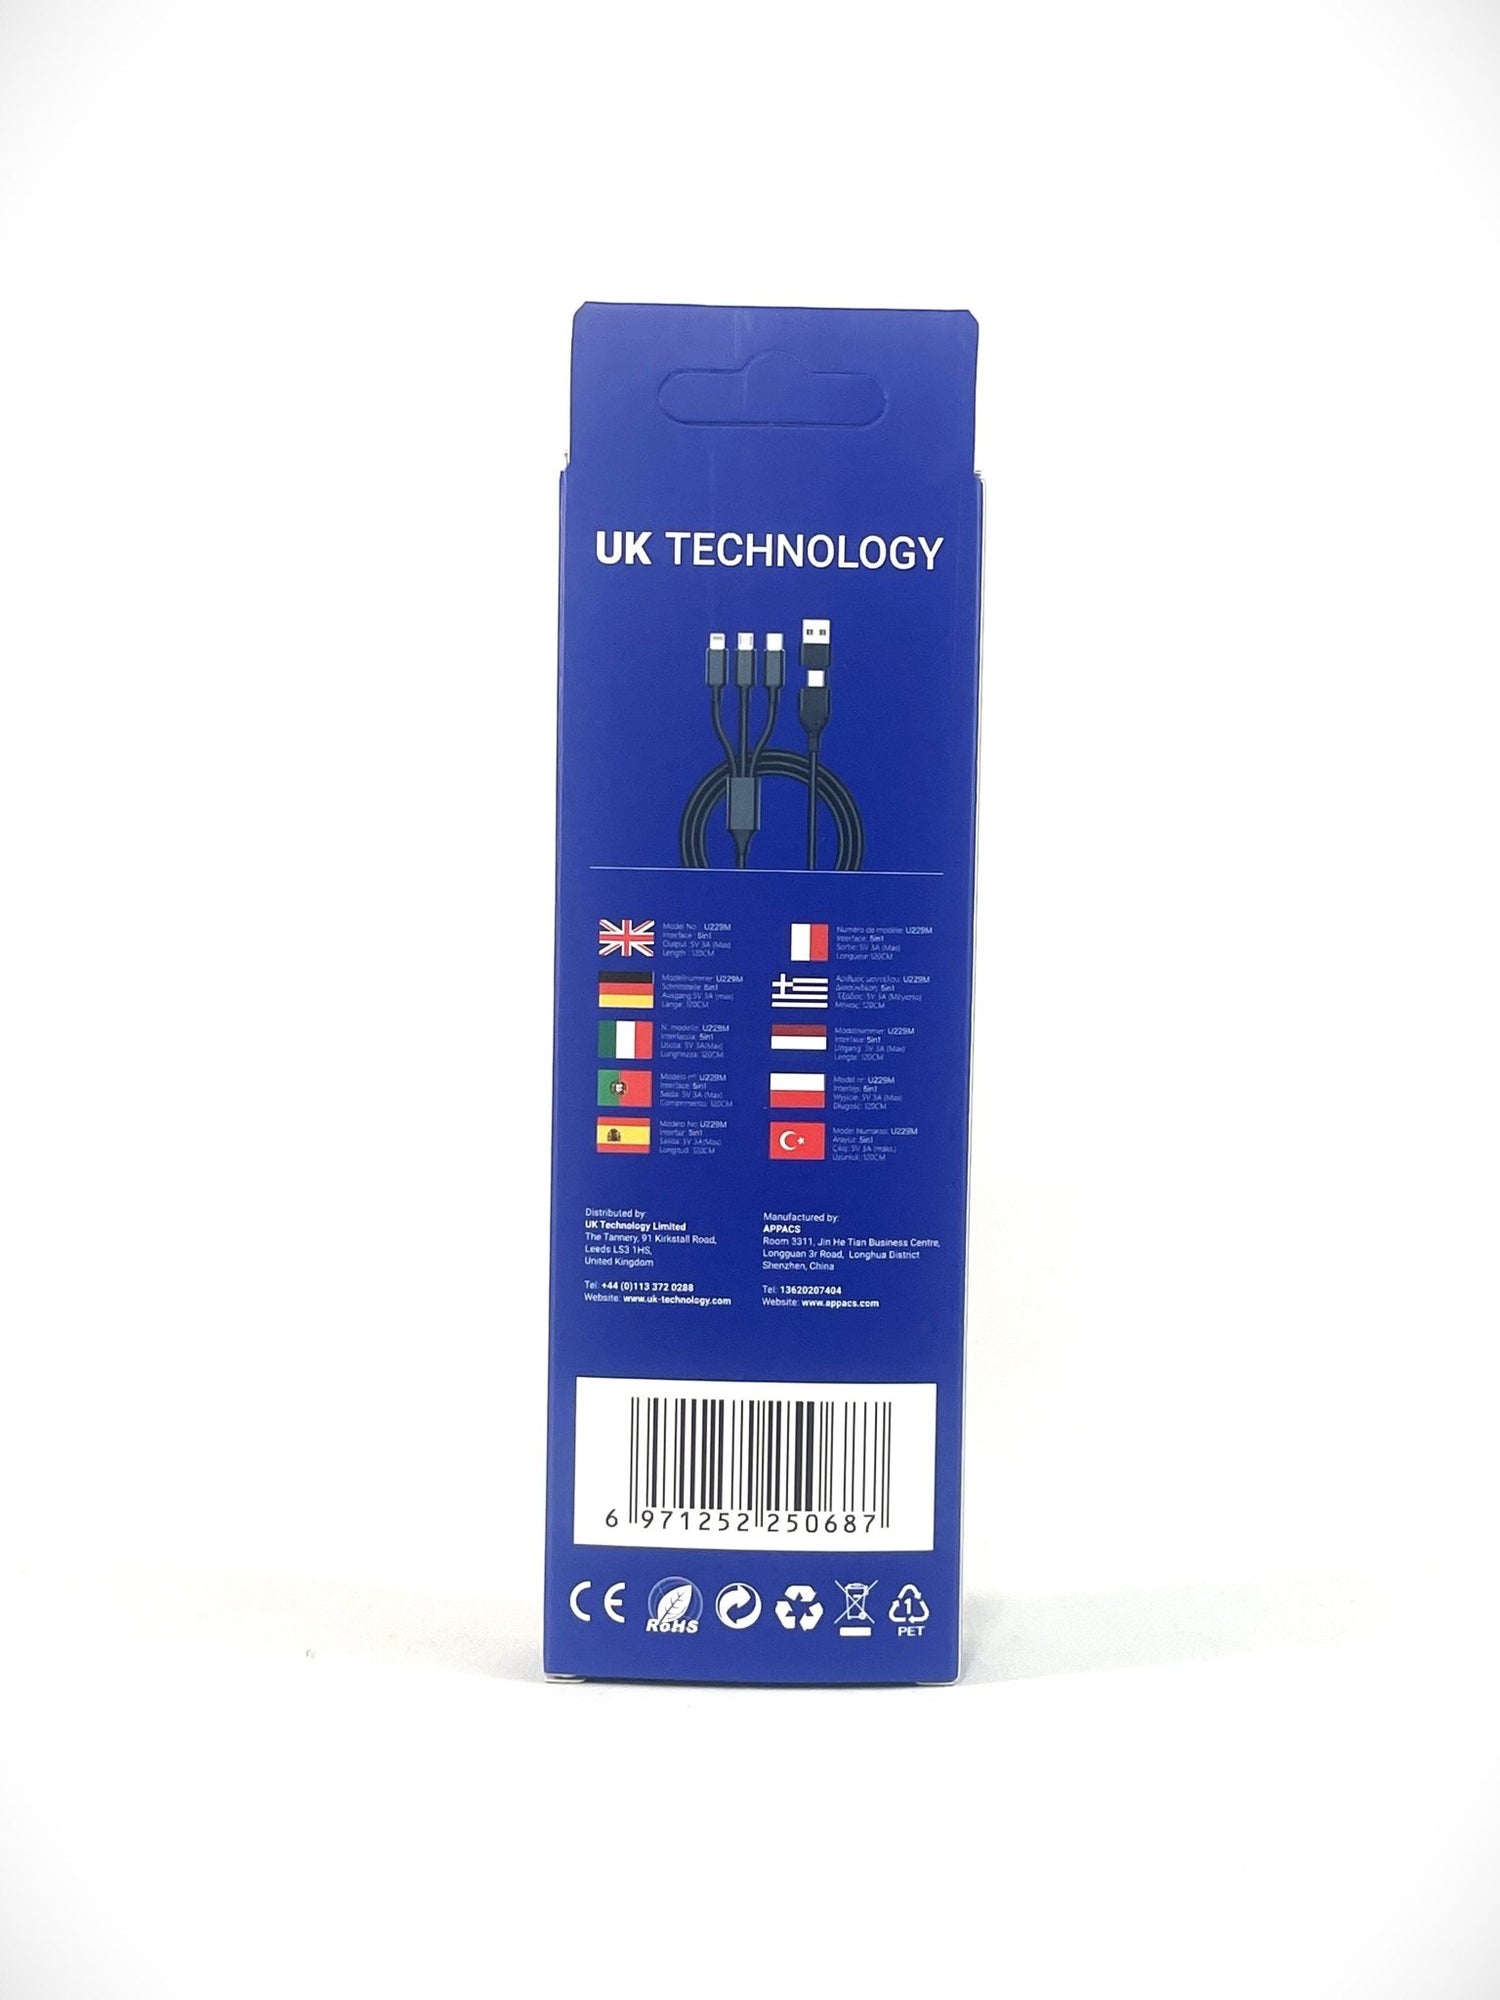 UK Technology 5-in-1 Charging Cable rear view of packaging